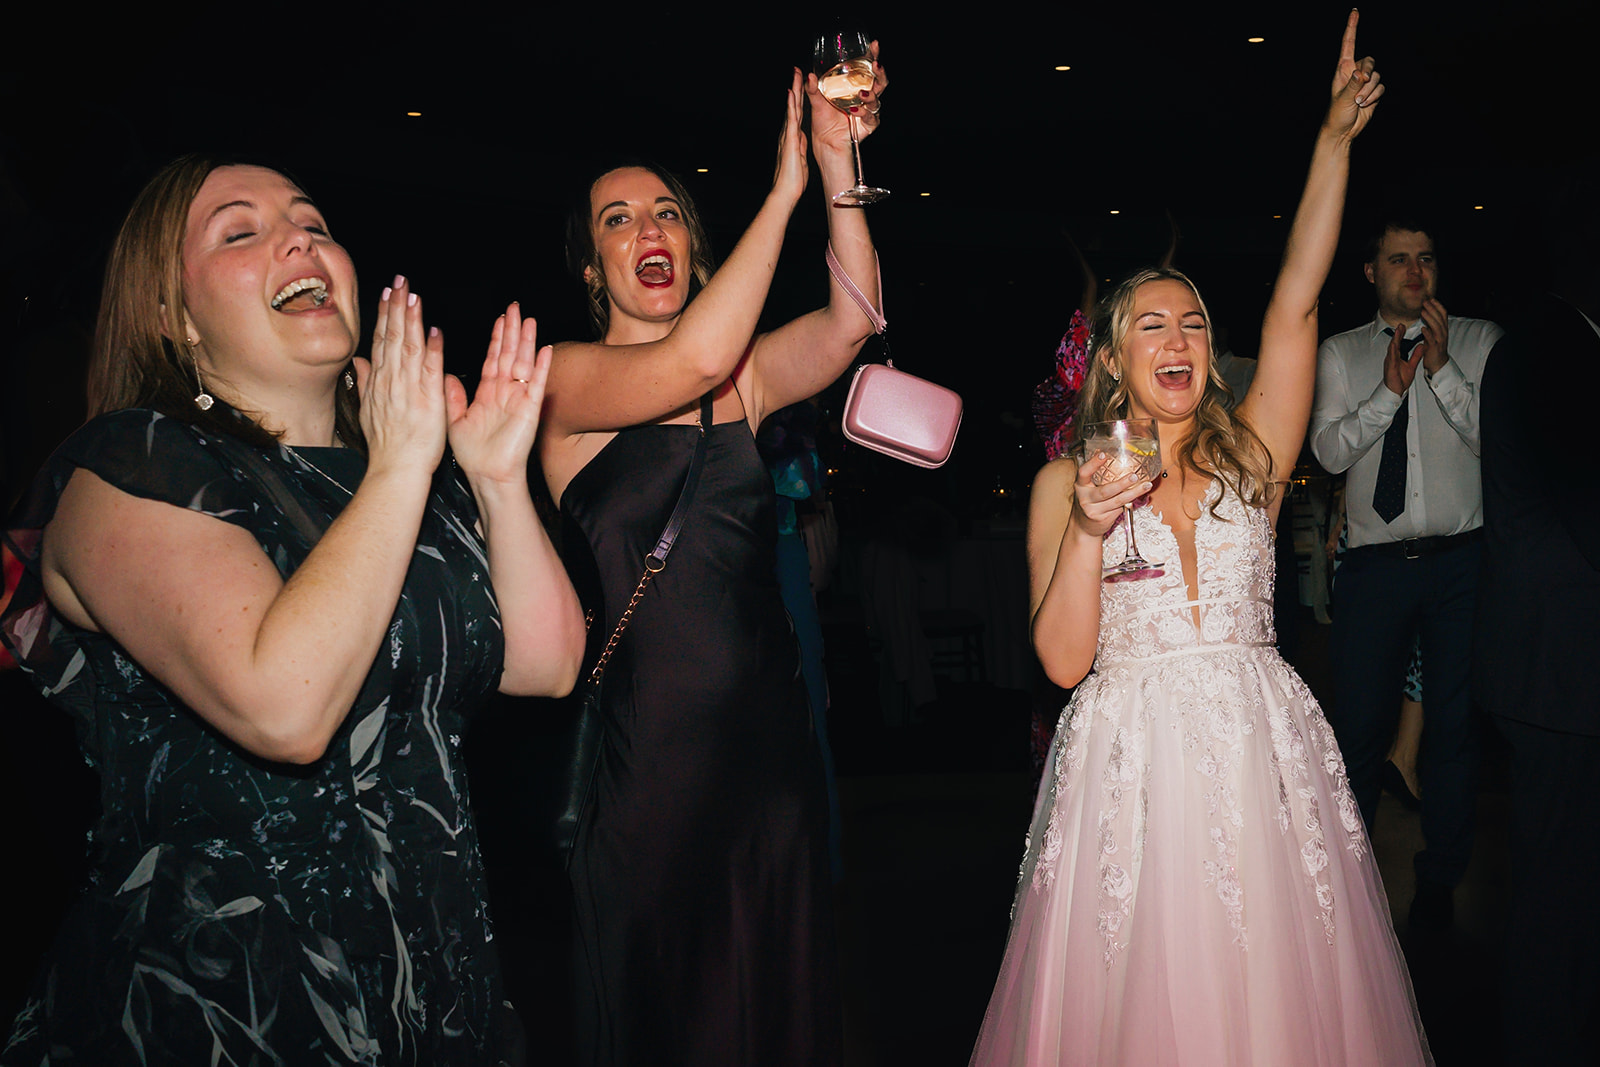 the bride and two wedding guests throw their arms in the air on the dance floor